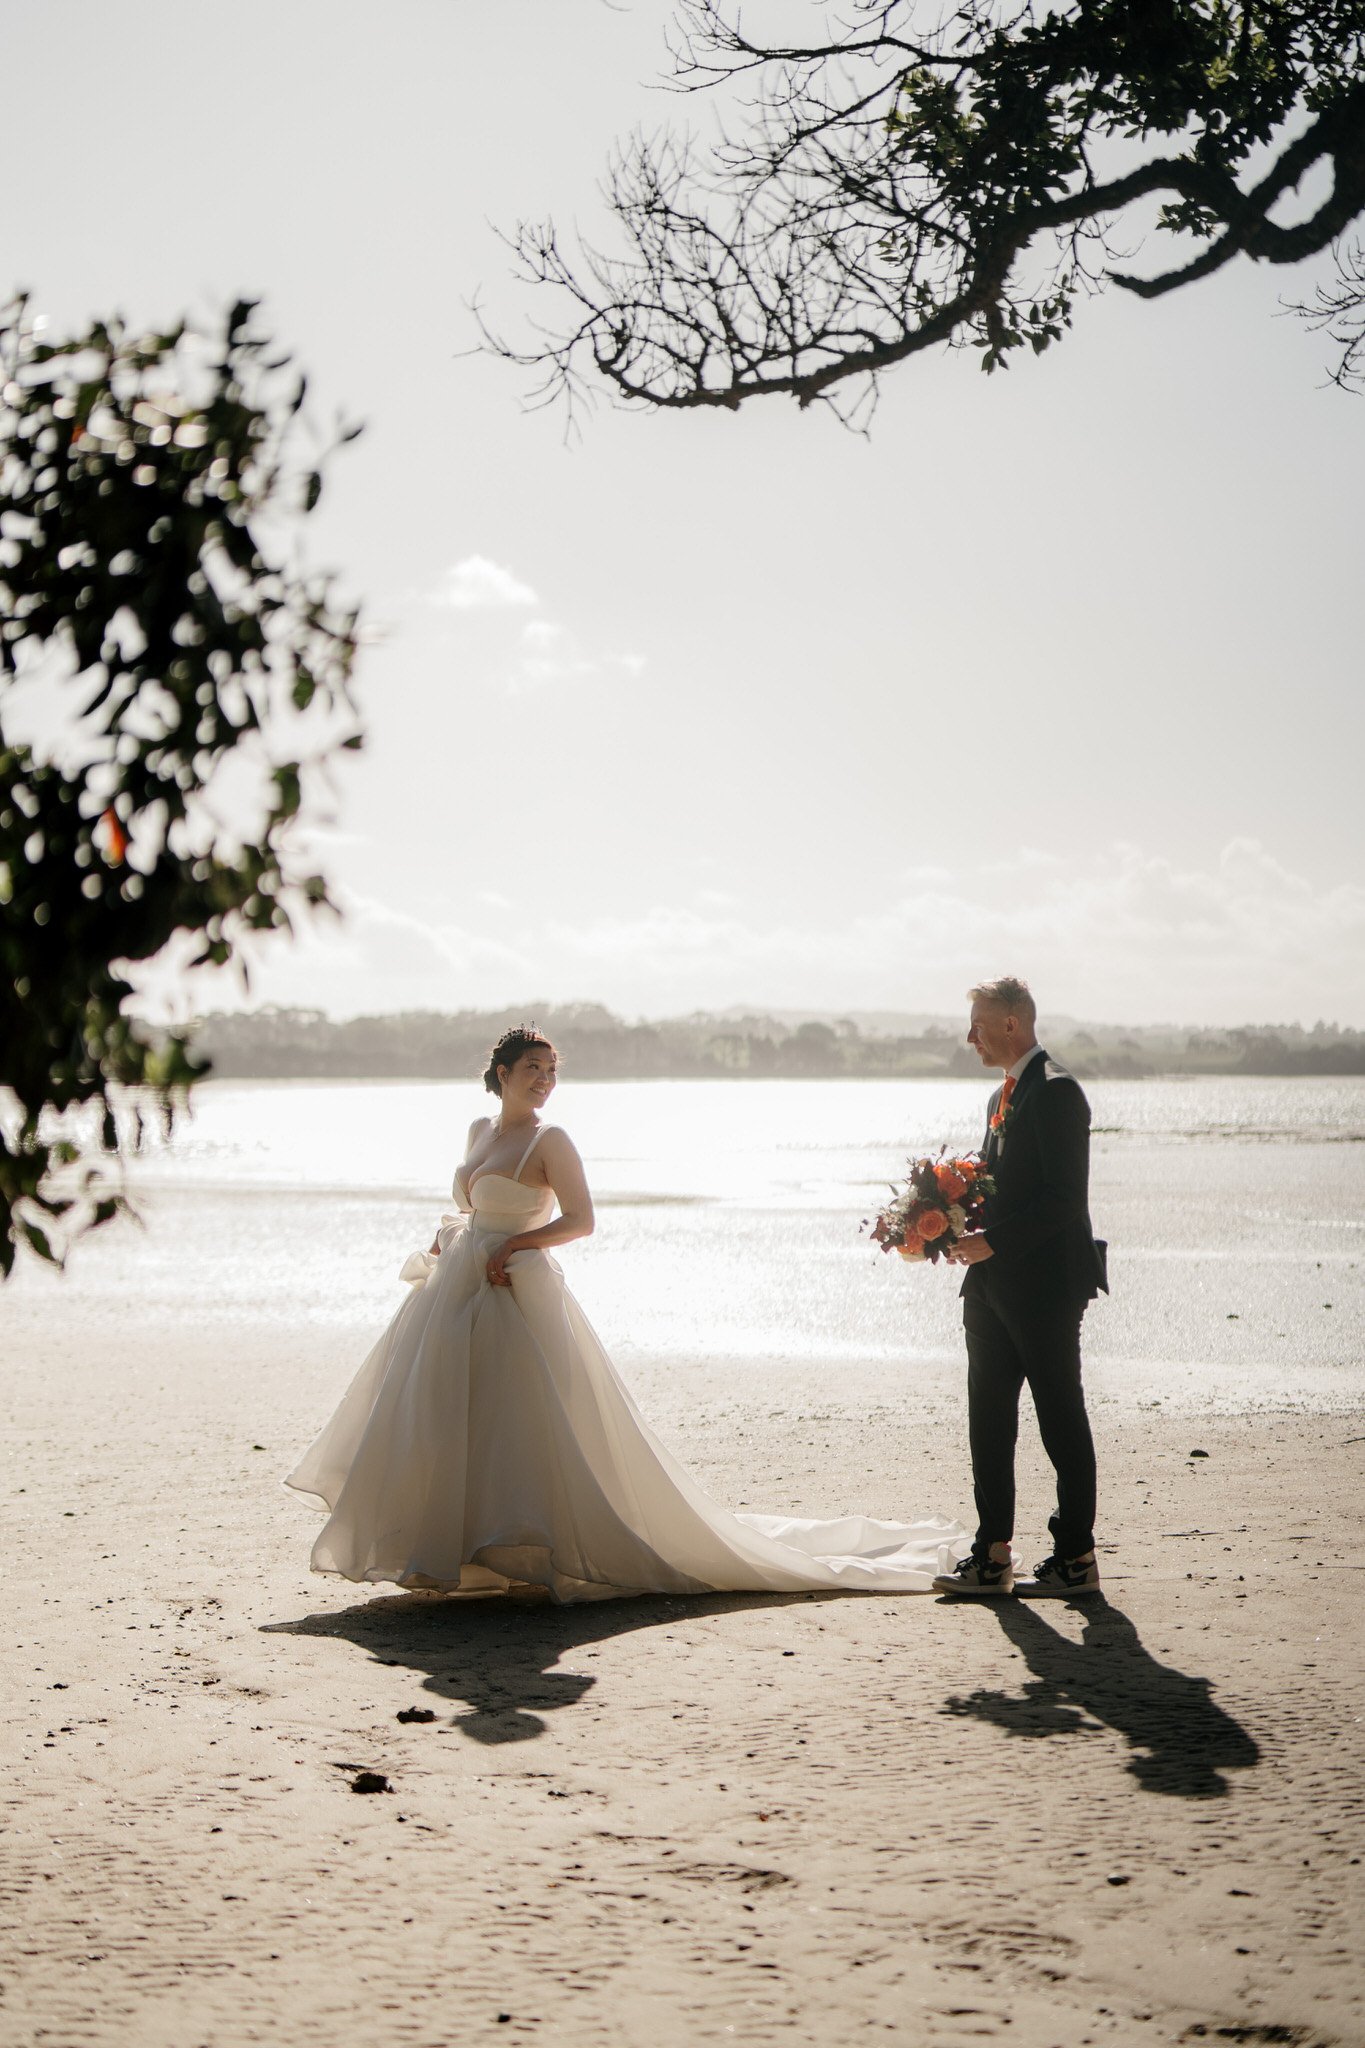 huntly-house-auckland-wedding-venue-mansion-vintage-luxury-accommodation-photographer-videography-dear-white-productions-photo-film-south-clarks-beach (104).jpg